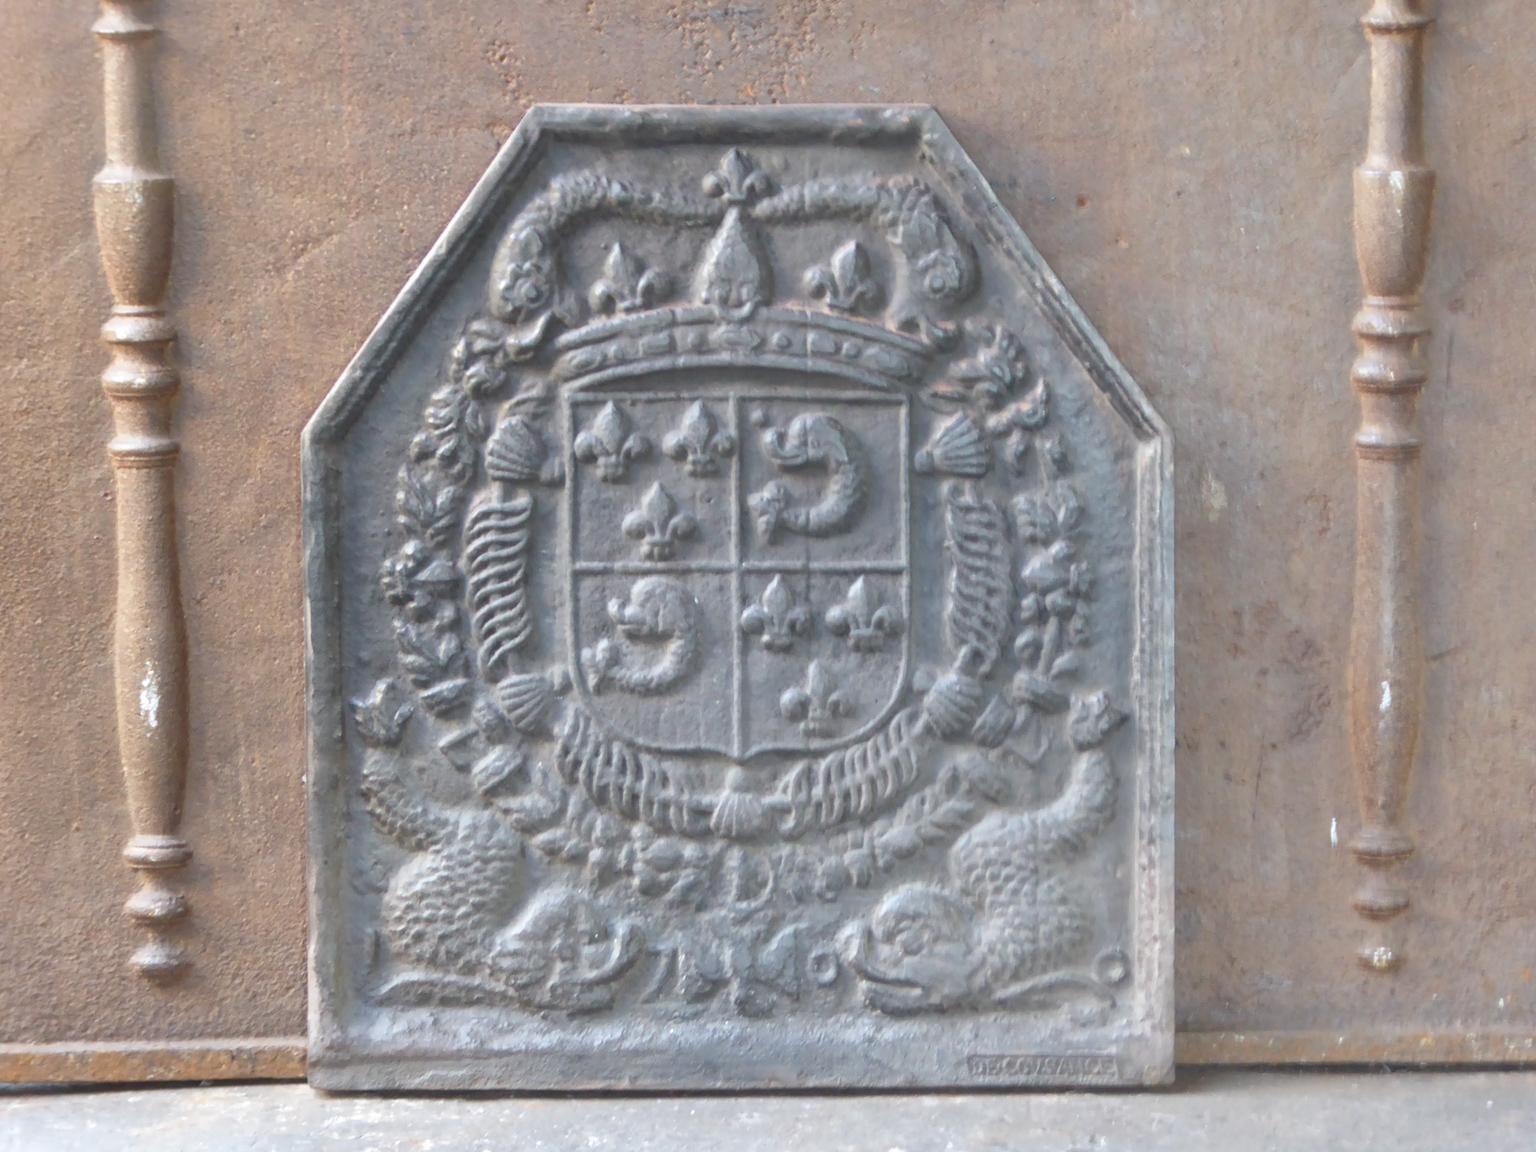 Coat of arms of the House of Bourbon, an originally French royal house that became a major dynasty in Europe. It delivered kings for Spain (Navarra), France, both Sicilies and Parma. Bourbon kings ruled France from 1589 up to the French revolution